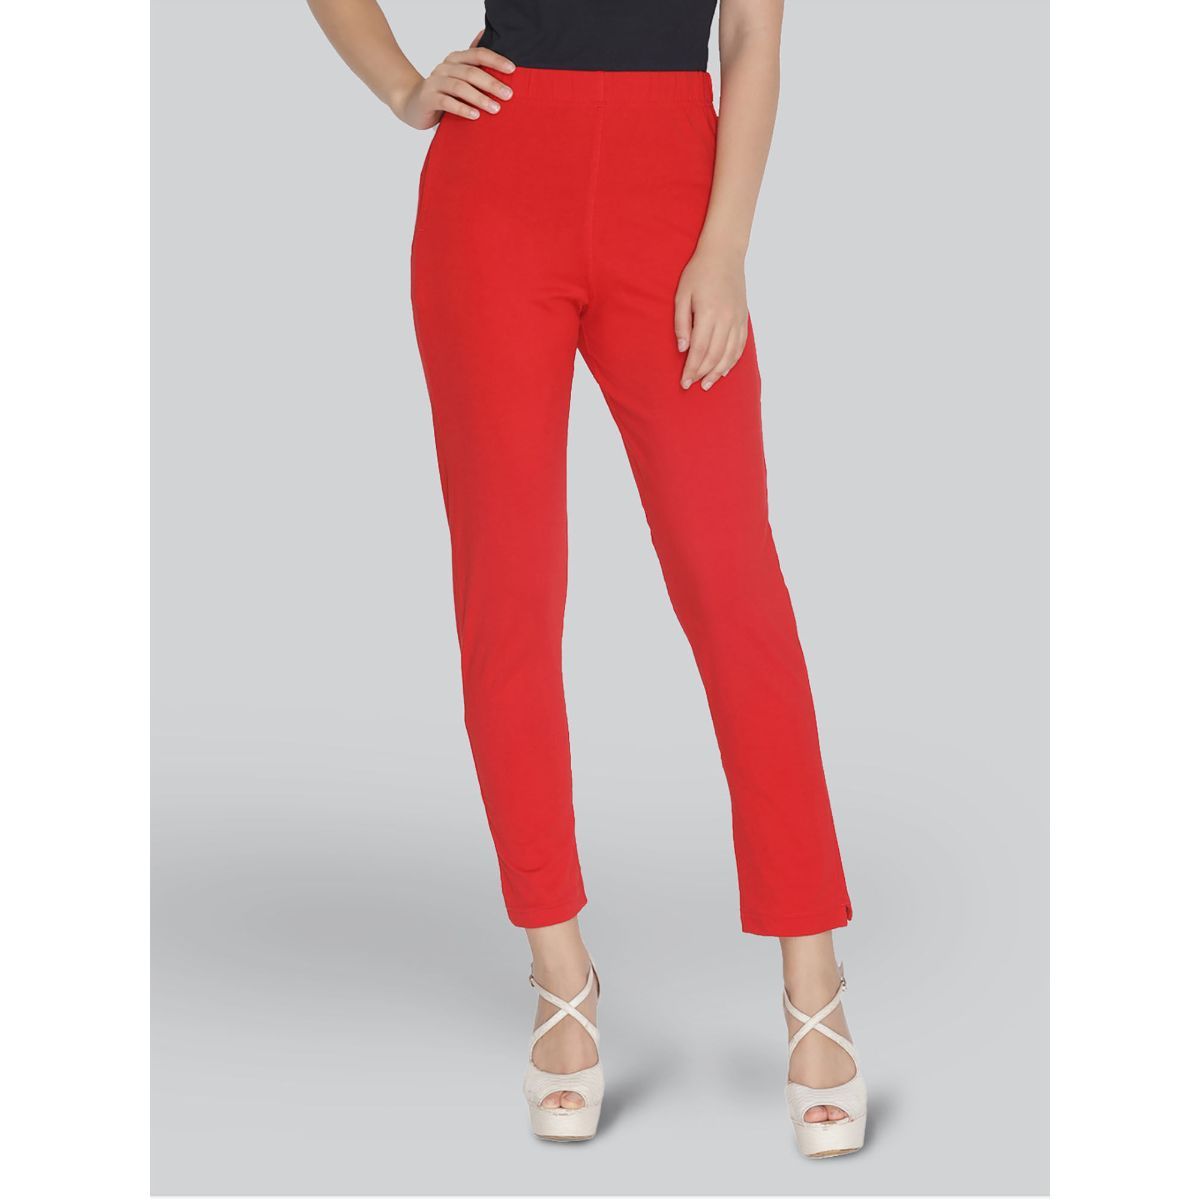 Plain Red Formal Ladies Cigarette Pants at Rs 200/piece in Delhi | ID:  21230178573